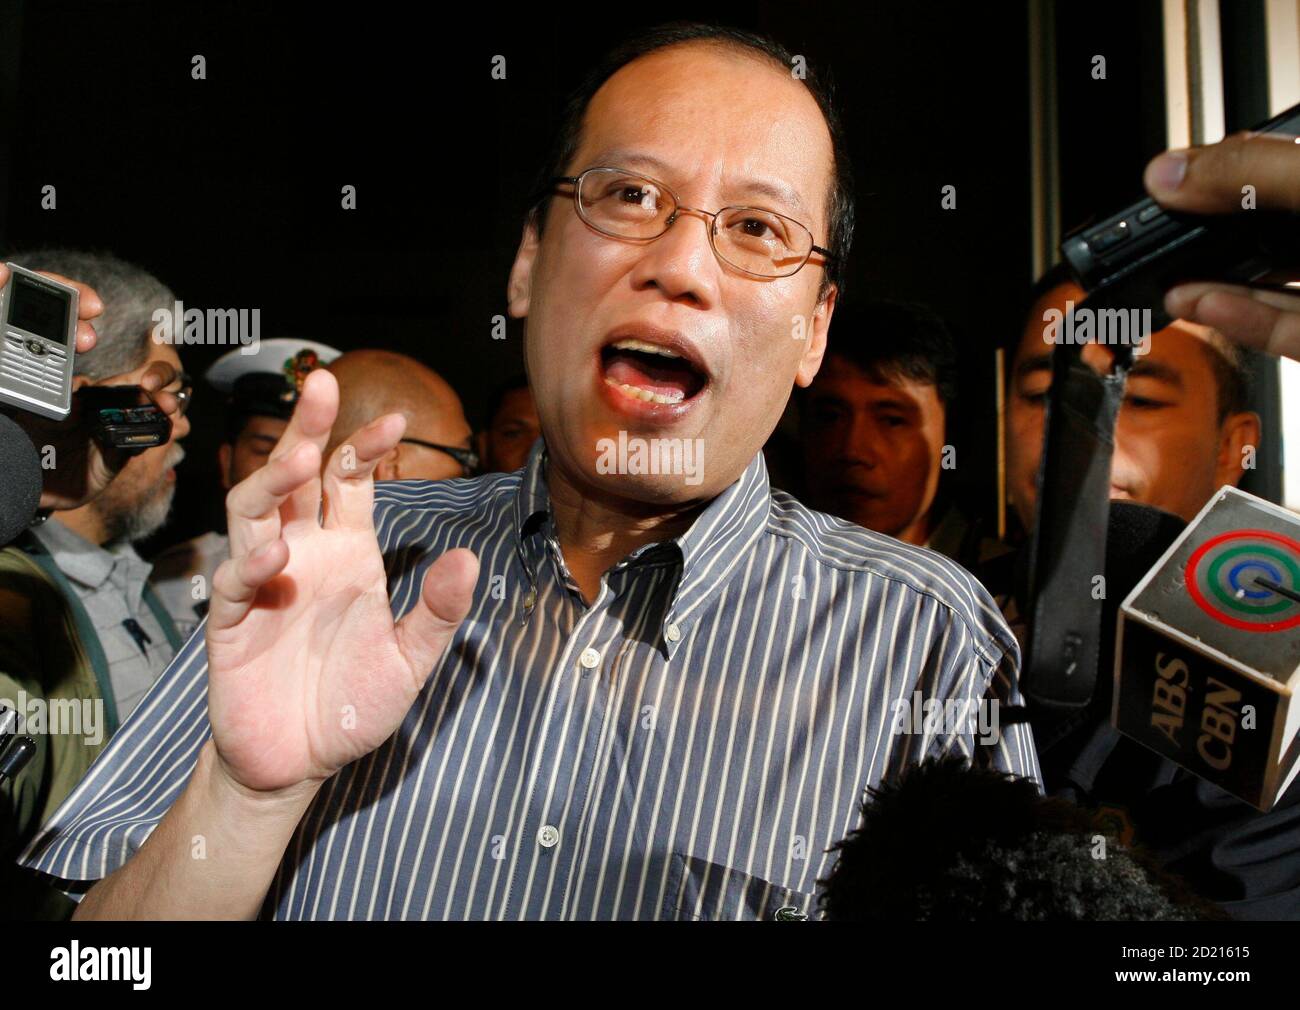 Senator Benigno 'NoyNoy' Aquino Jr gestures as he announces to reporters the death of his mother, former President Corazon Aquino, at the lobby of Makati Medical Centre in Manila's Makati financial district August 1, 2009. Aquino, former president and heroine of the 1986 'people power' revolution, has died after a 16-month battle against colon cancer.    REUTERS/Erik de Castro       (PHILIPPINES POLITICS OBITUARY) Stock Photo